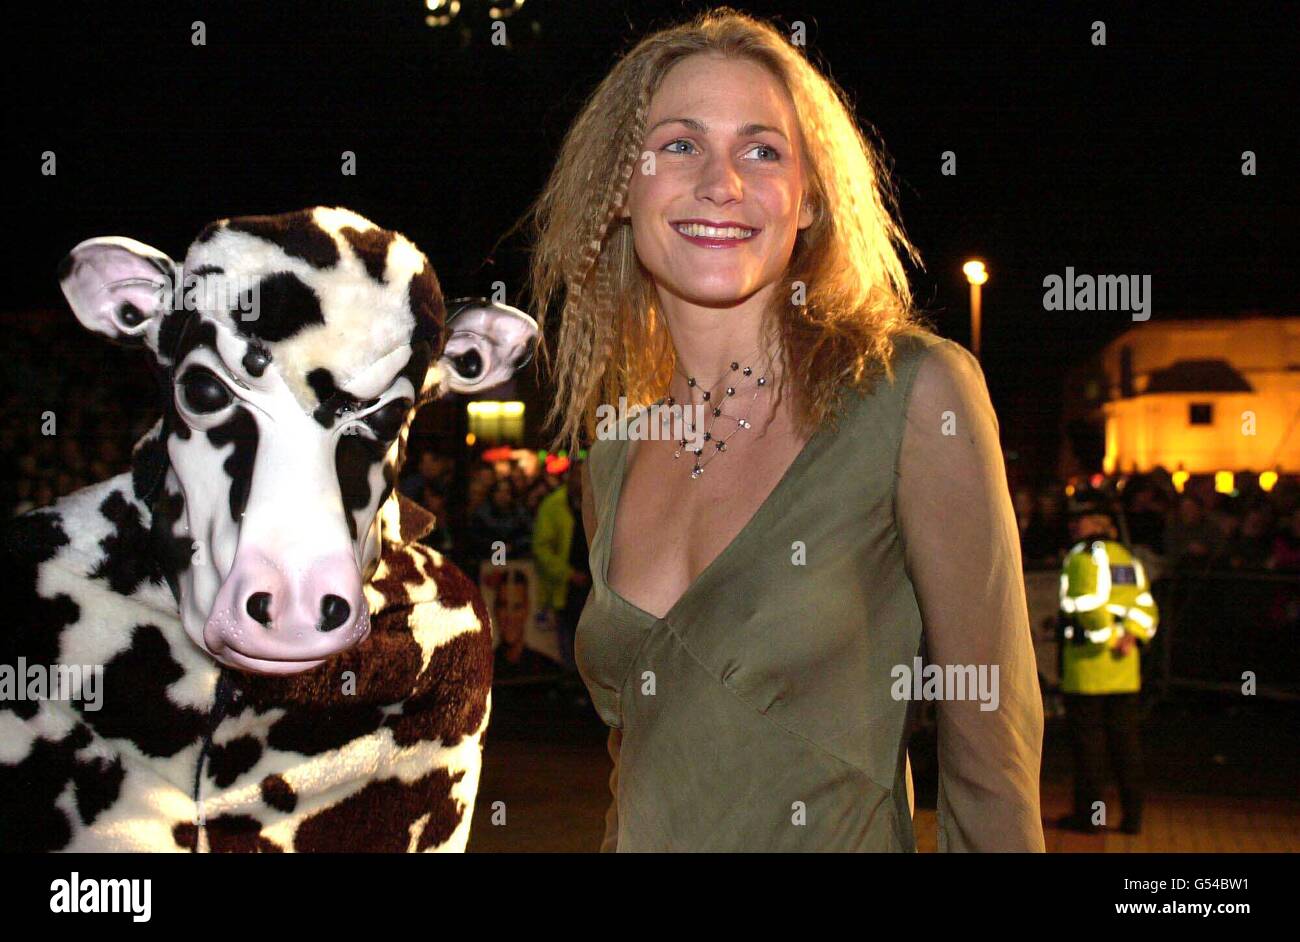 Former Big Brother contestant Sada Walkington arriving at the film premiere of 'Me, Myself and Irene' at the Apollo Cinema in Rhyl, north Wales. Stock Photo